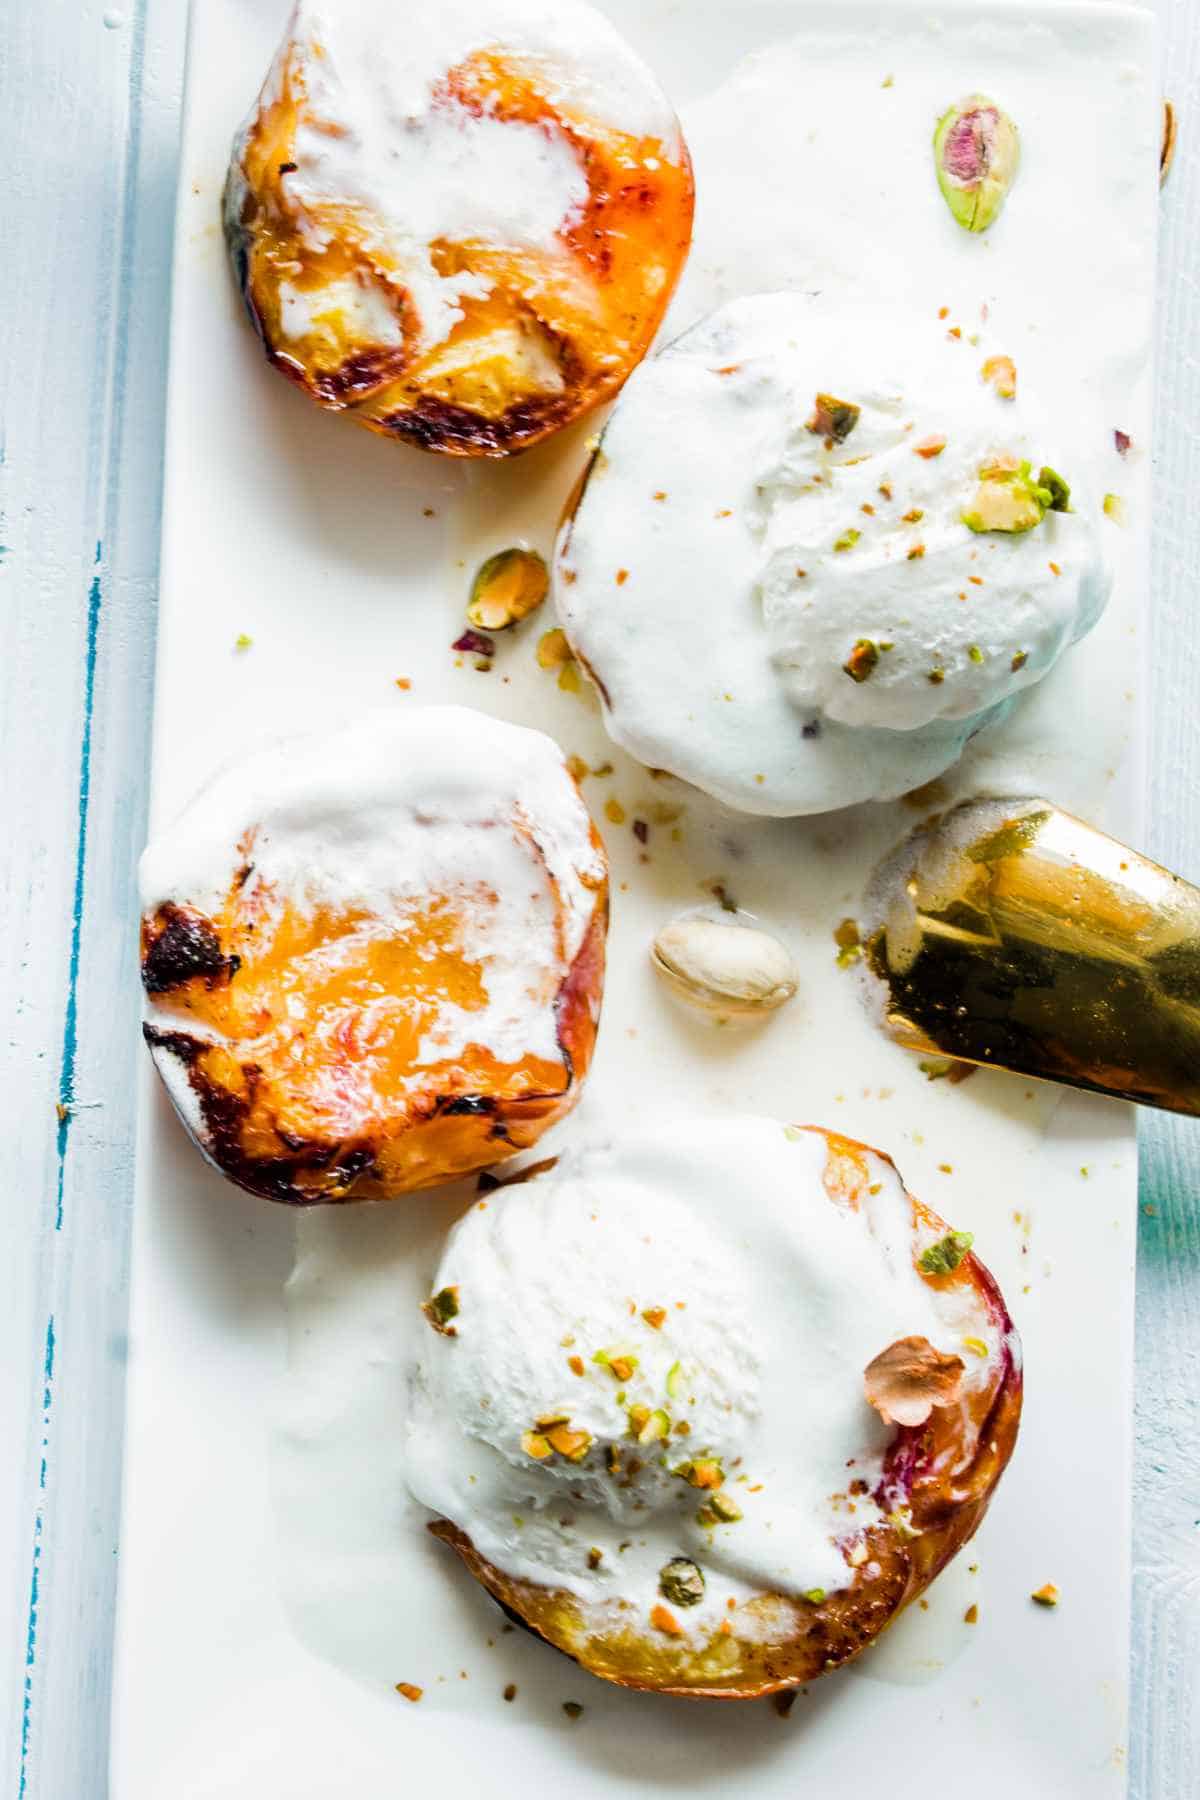 roasted fruit with brown sugar ,pistacchio and cinnamon, topped with vanilla ice cream.